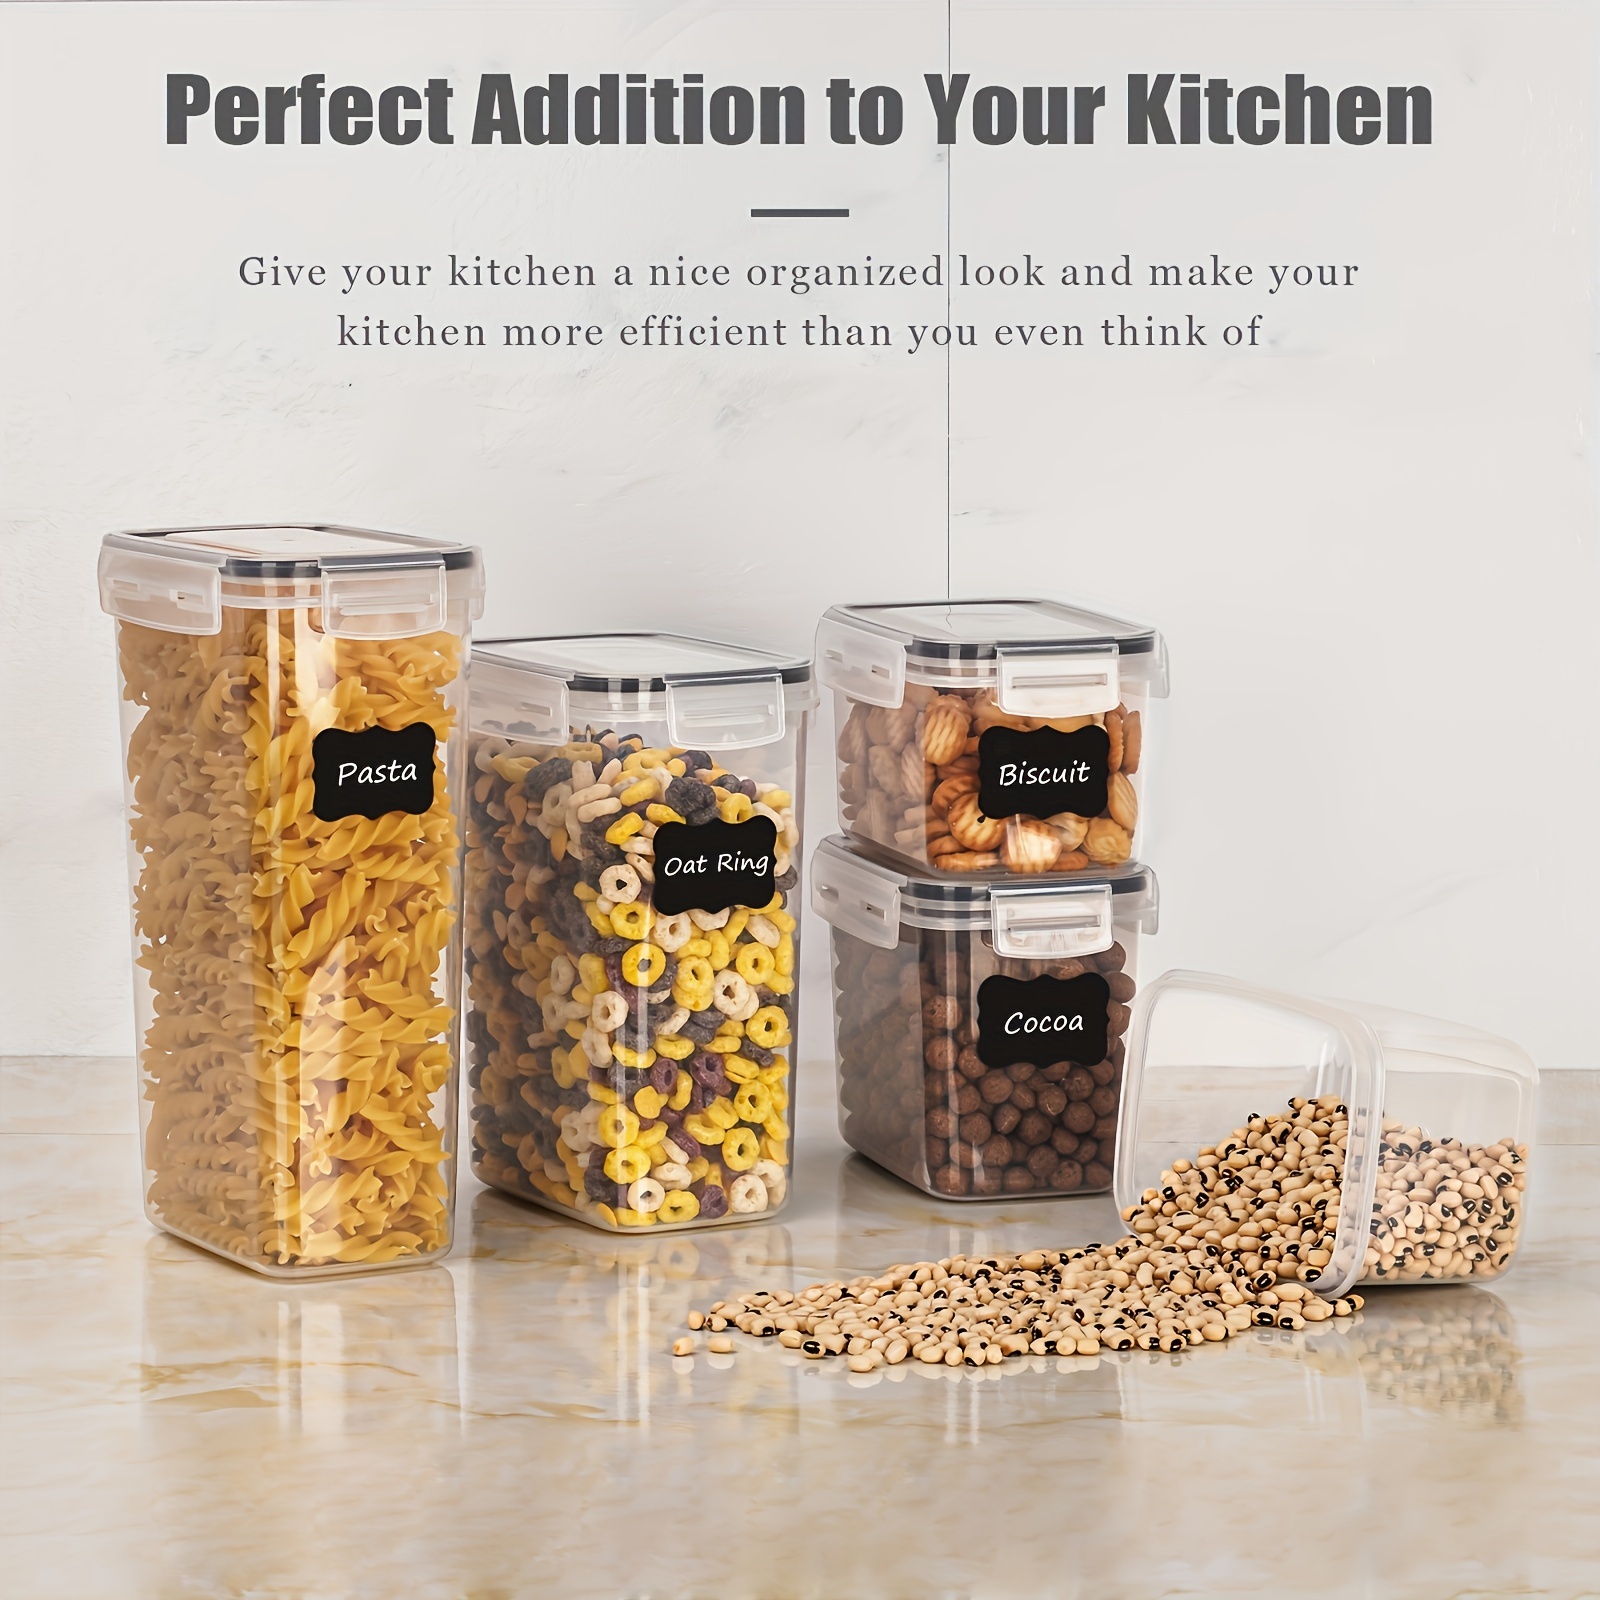  Vtopmart Airtight Food Storage Containers, 7 Pieces